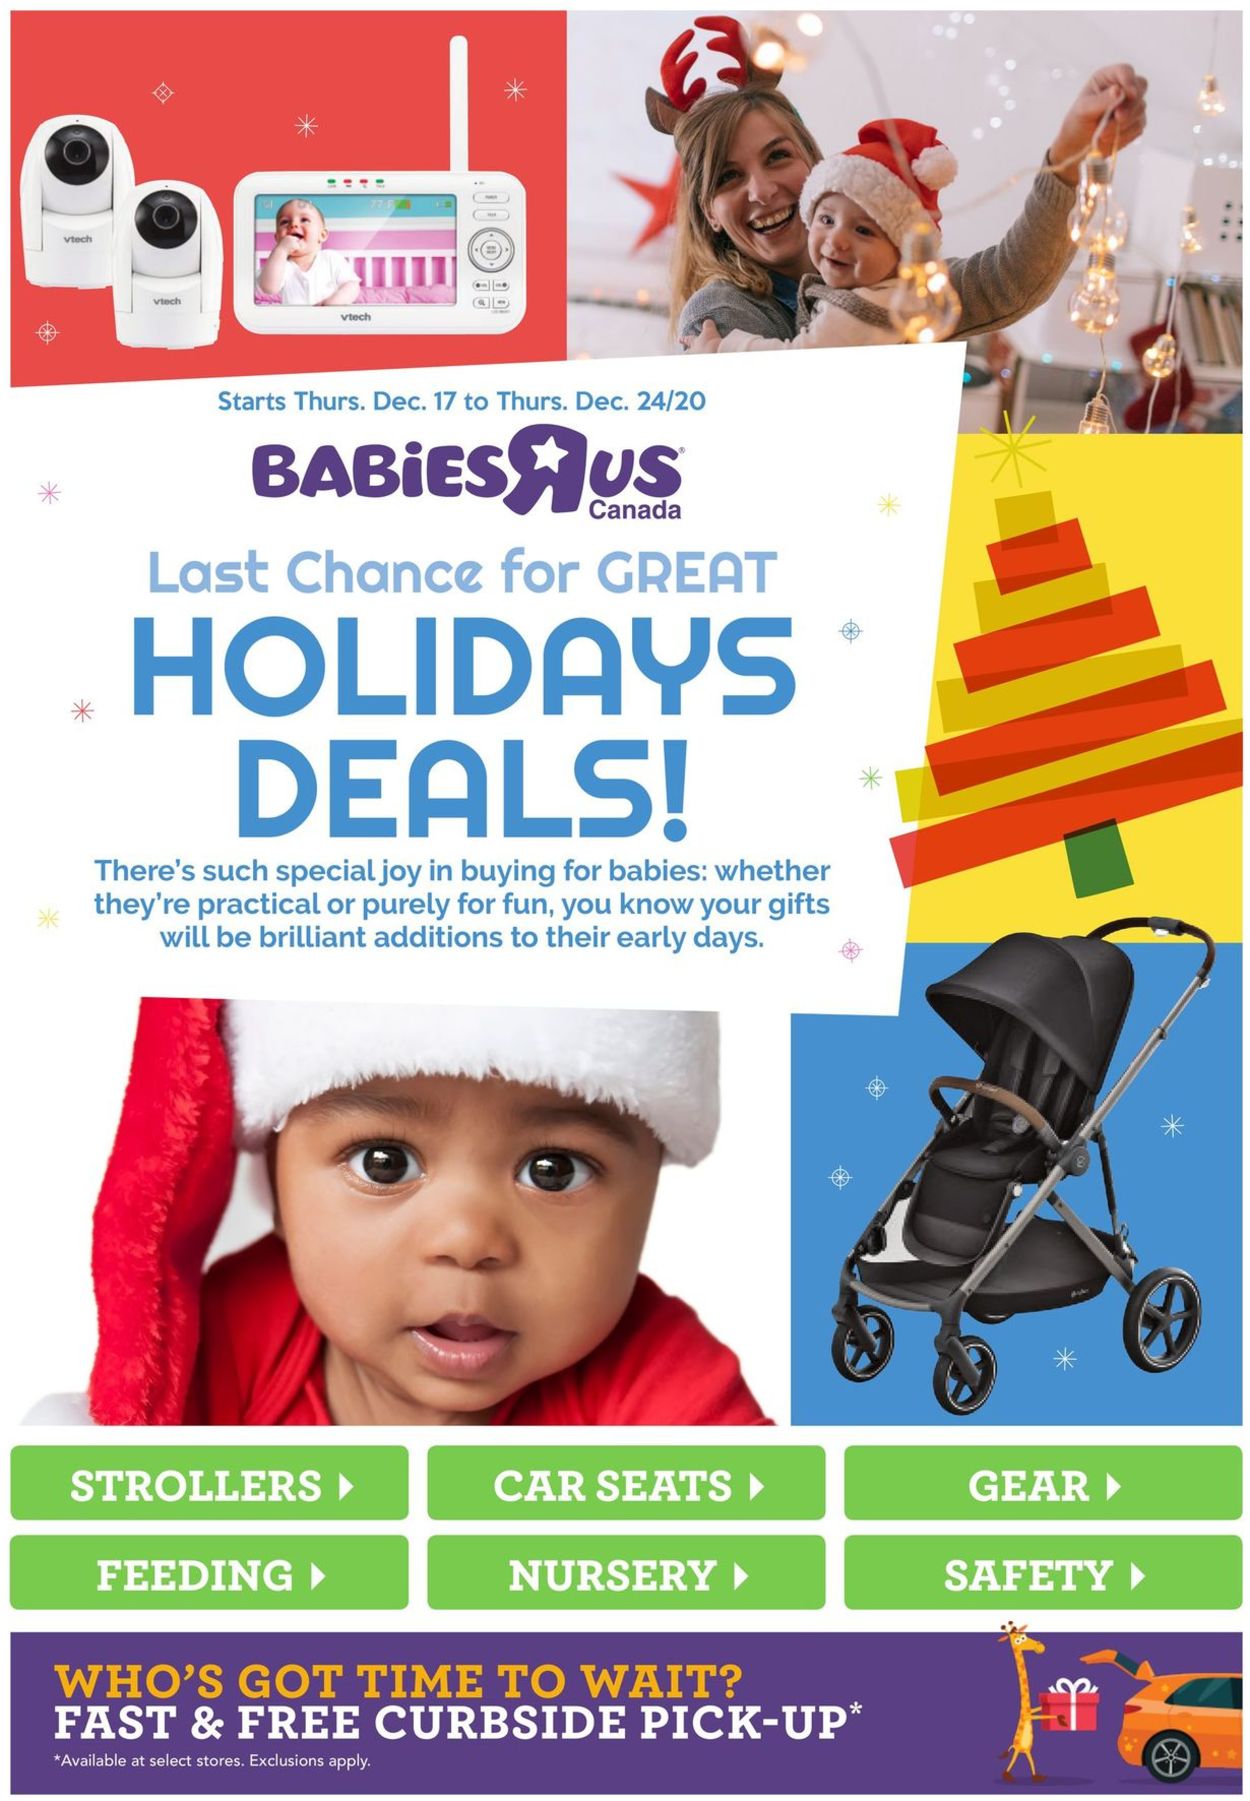 Toys''R''Us - Holiday 2020 Flyer - 12/17-12/24/2020